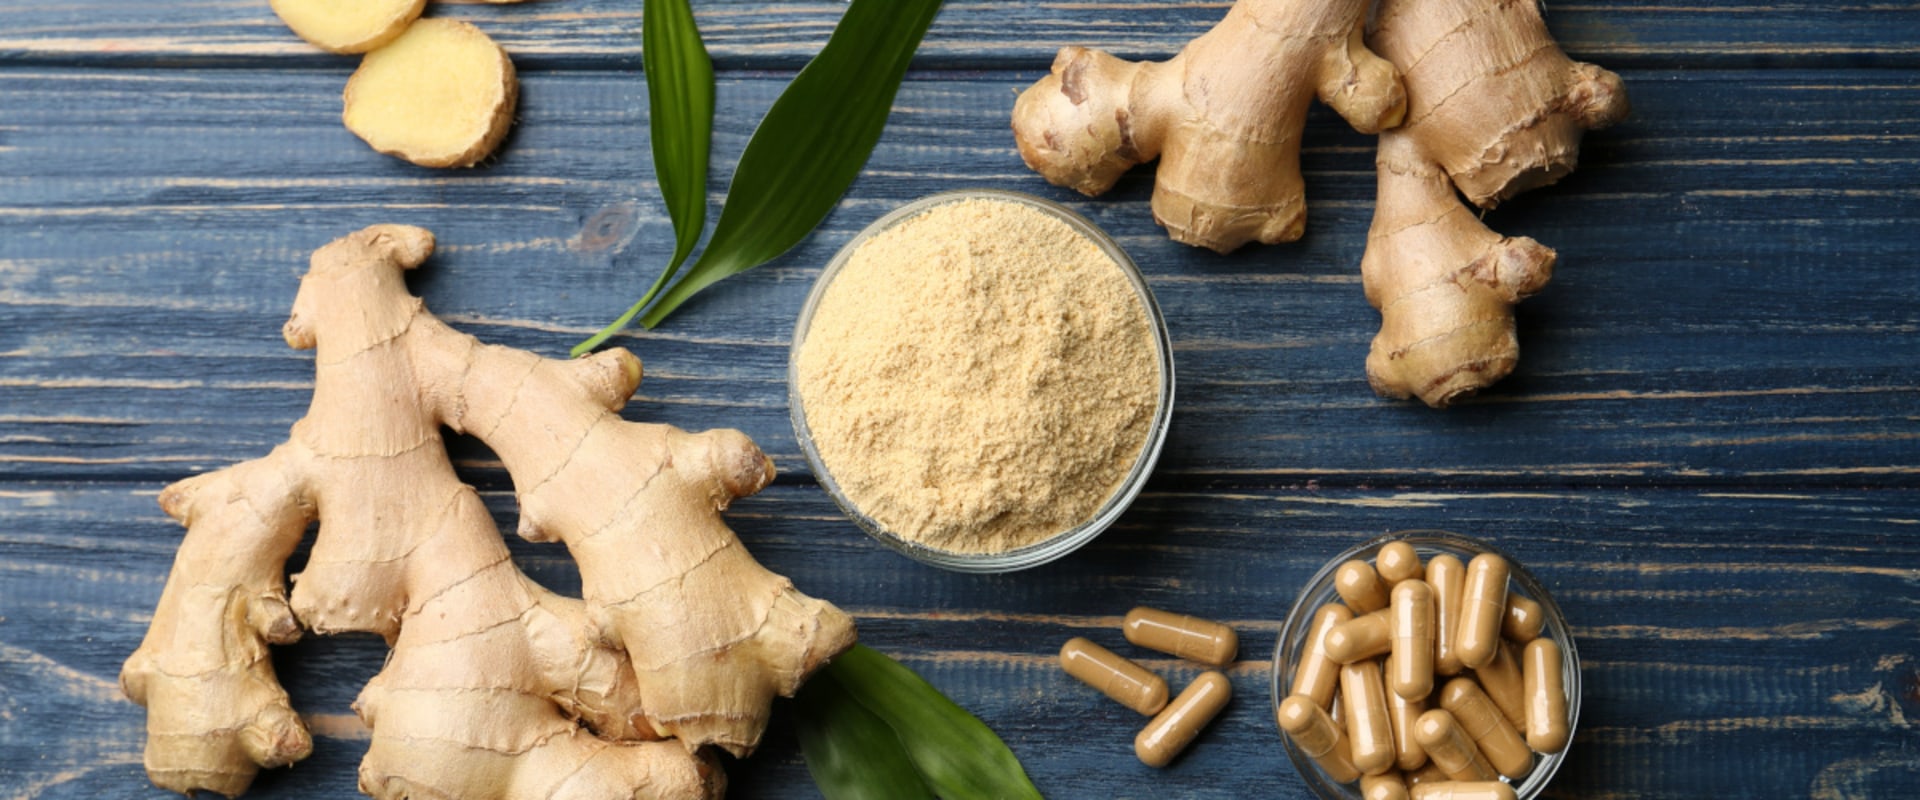 The Benefits and Risks of Taking Ginger Supplements